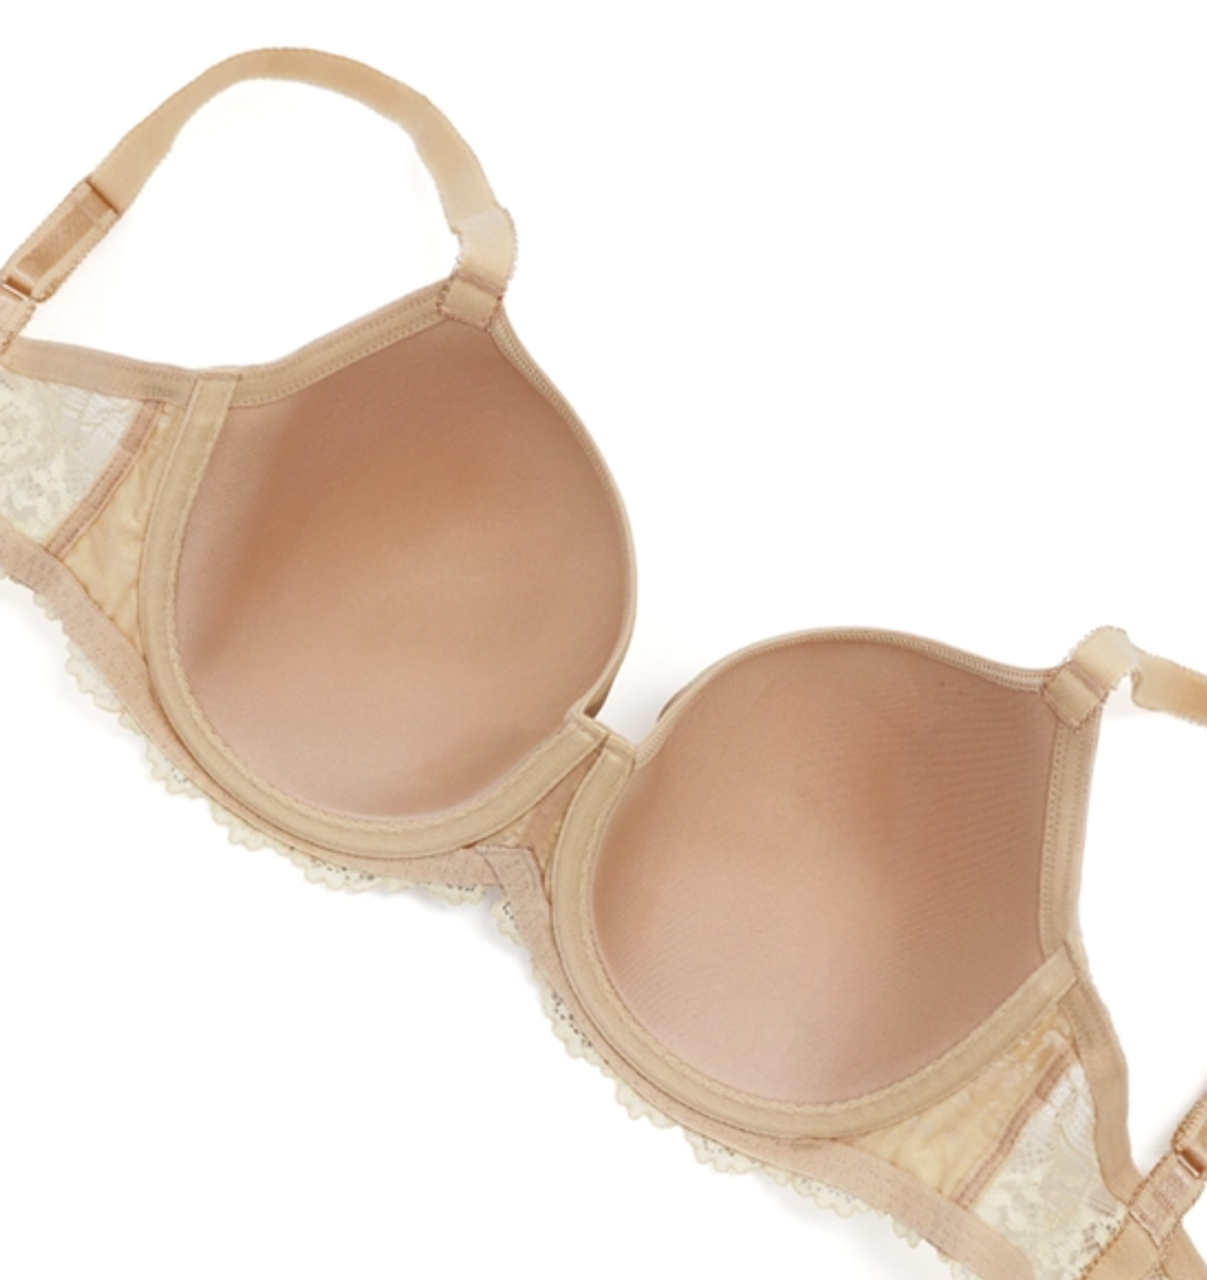 Embrace Lace Naturally Nude / Ivory Classic Underwire Bra - Wacoal